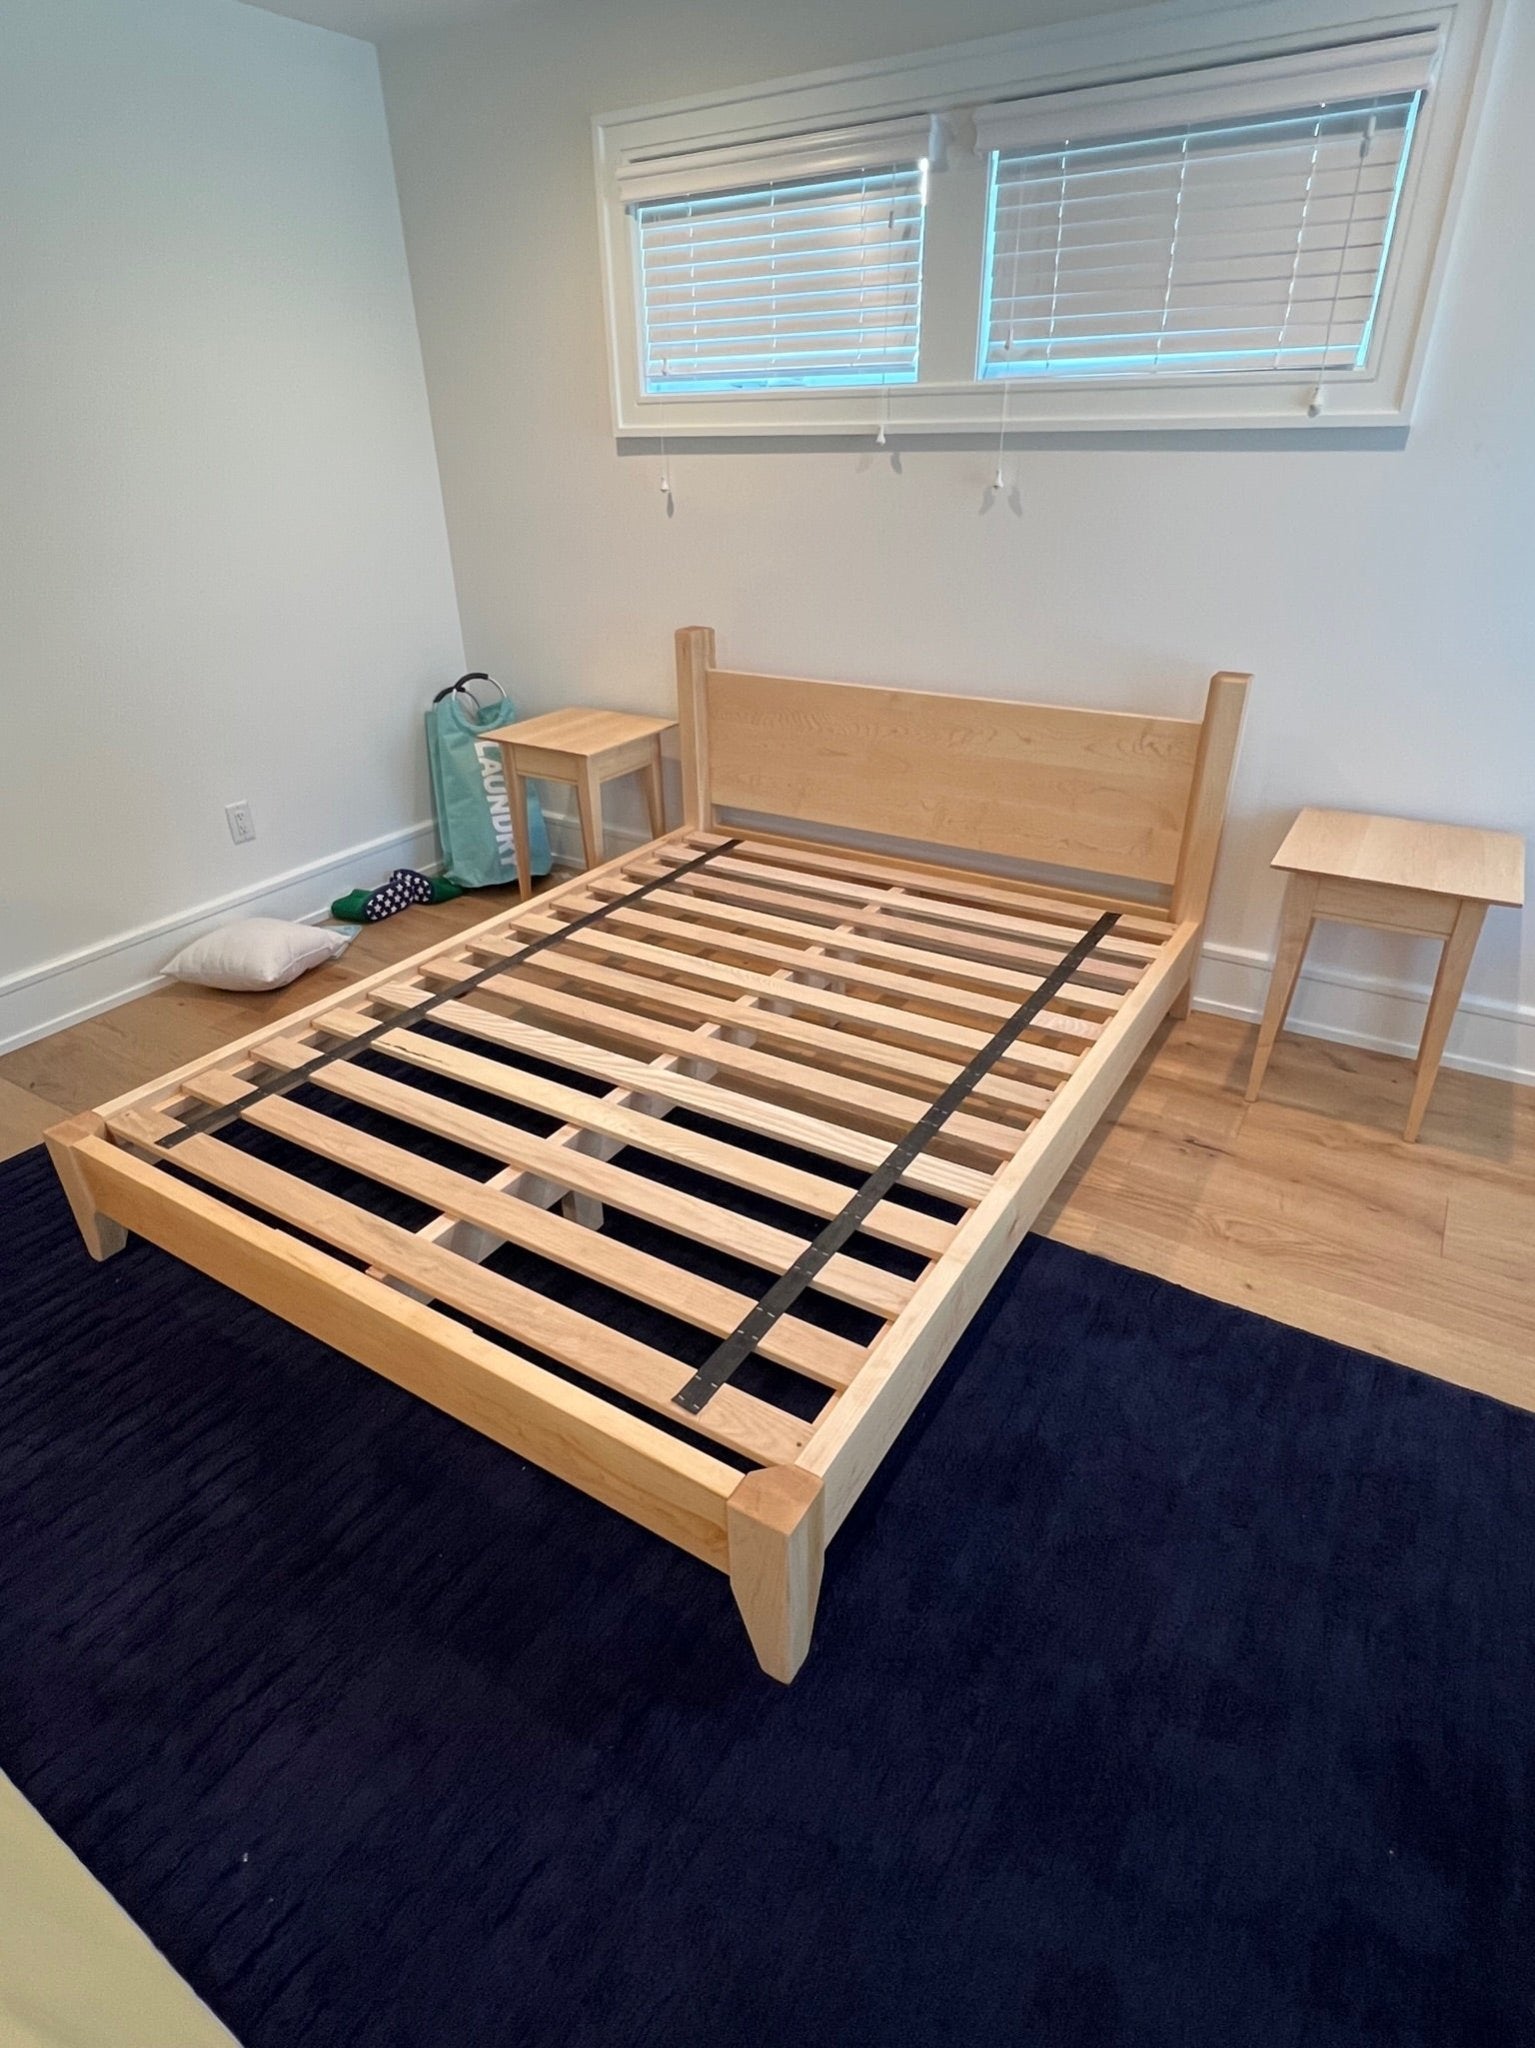 Queen size maple bed frame with live edge headboard by Rosehammer